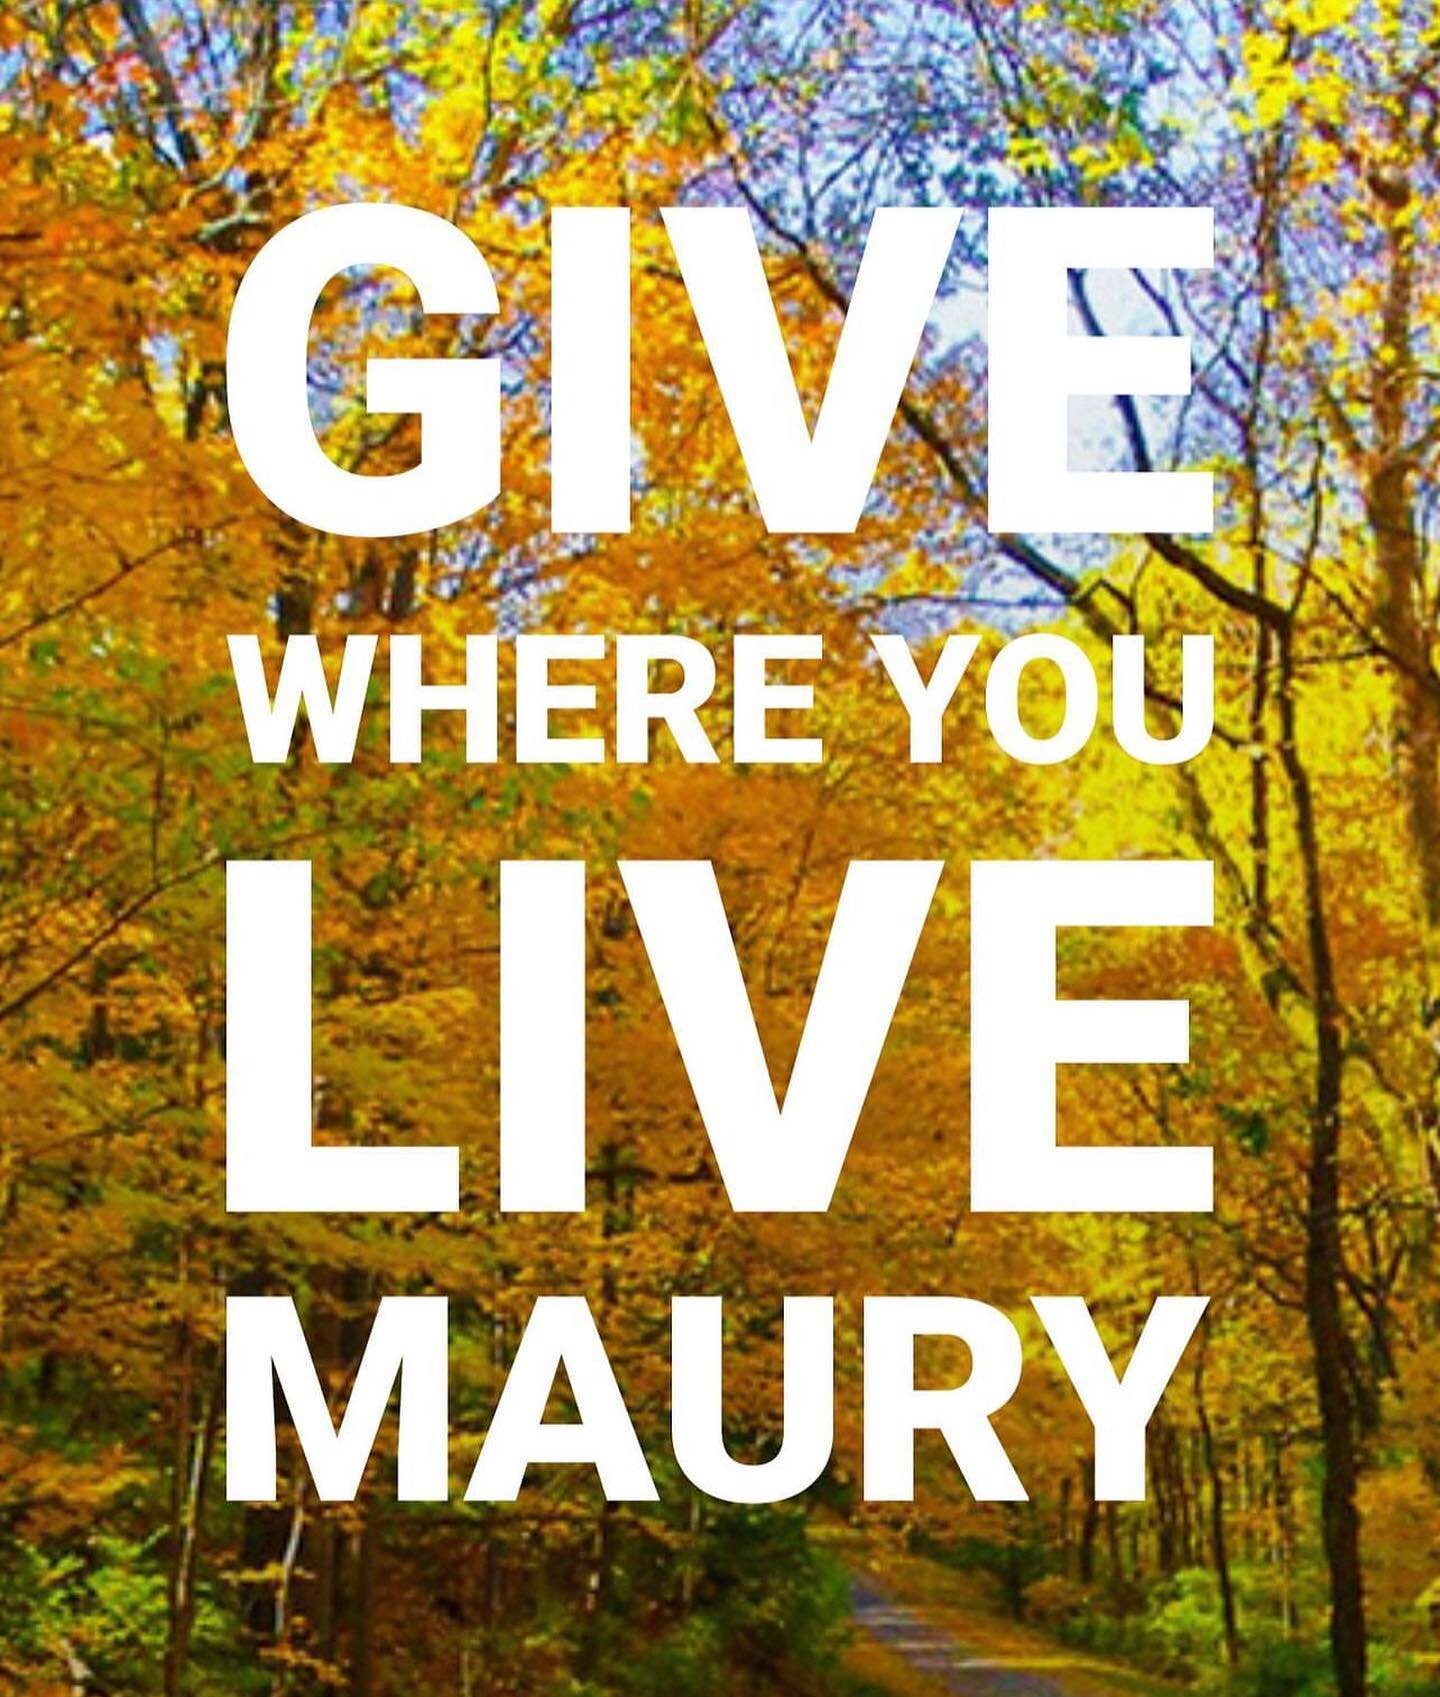 GIVING TUESDAY!

One of the many amazing things about Maury County is our love for our community and it&rsquo;s people. Today, we have to opportunity to give back and support our local nonprofits. All funds will go directly to the nonprofit of your c